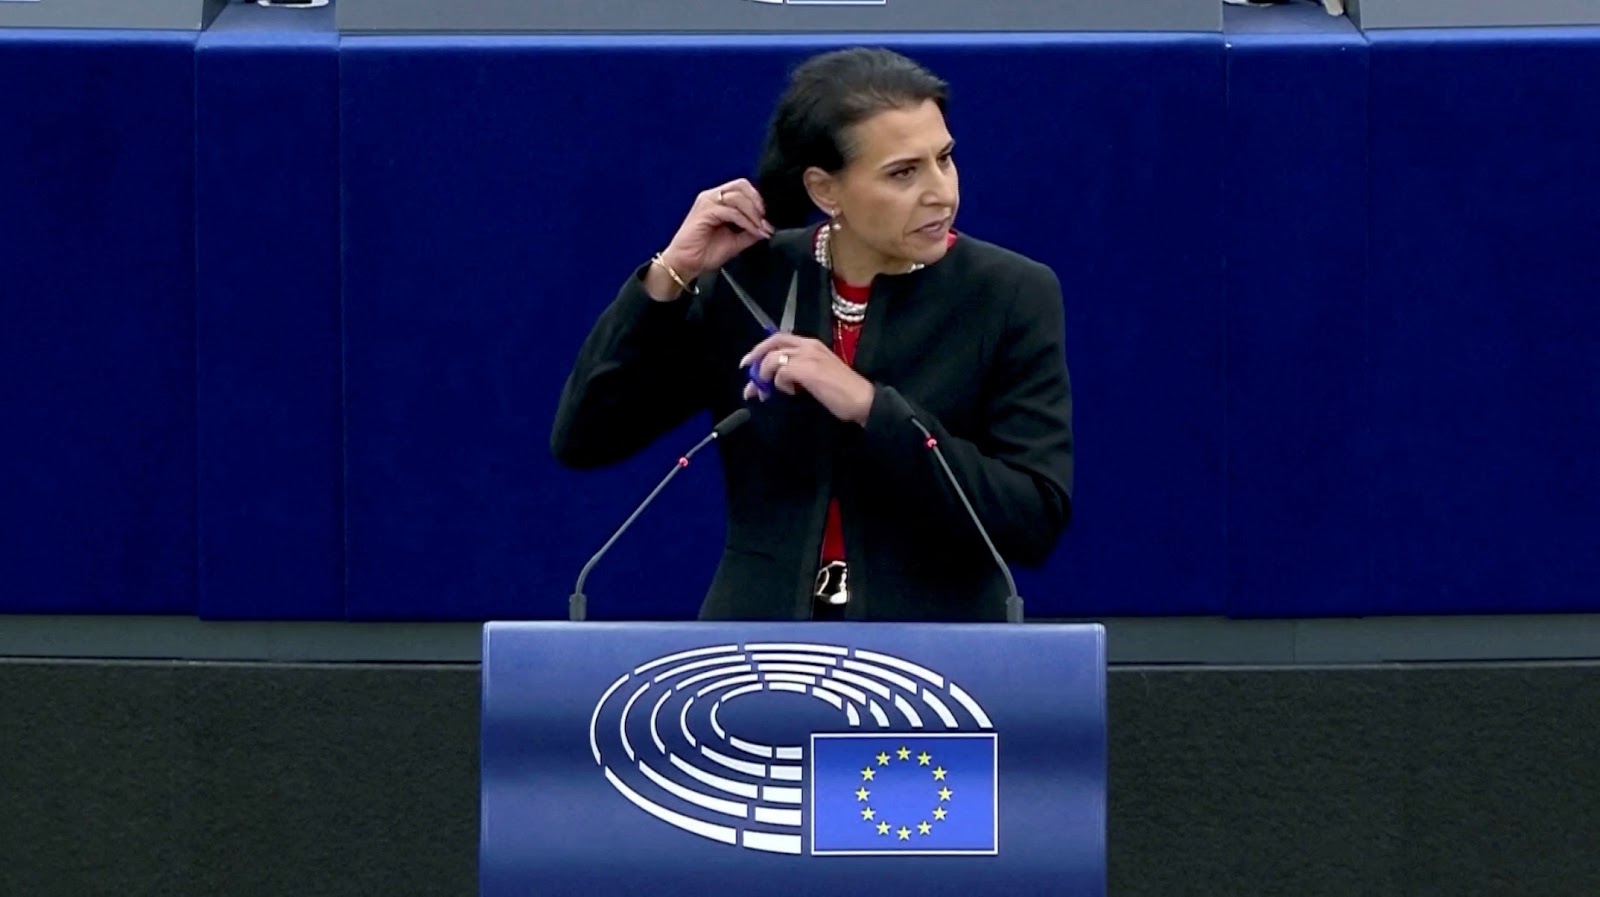 Swedish lawmaker Abir Al-Sahlani cuts her hair as she delivers a speech at EU Parliament in Strasbourg